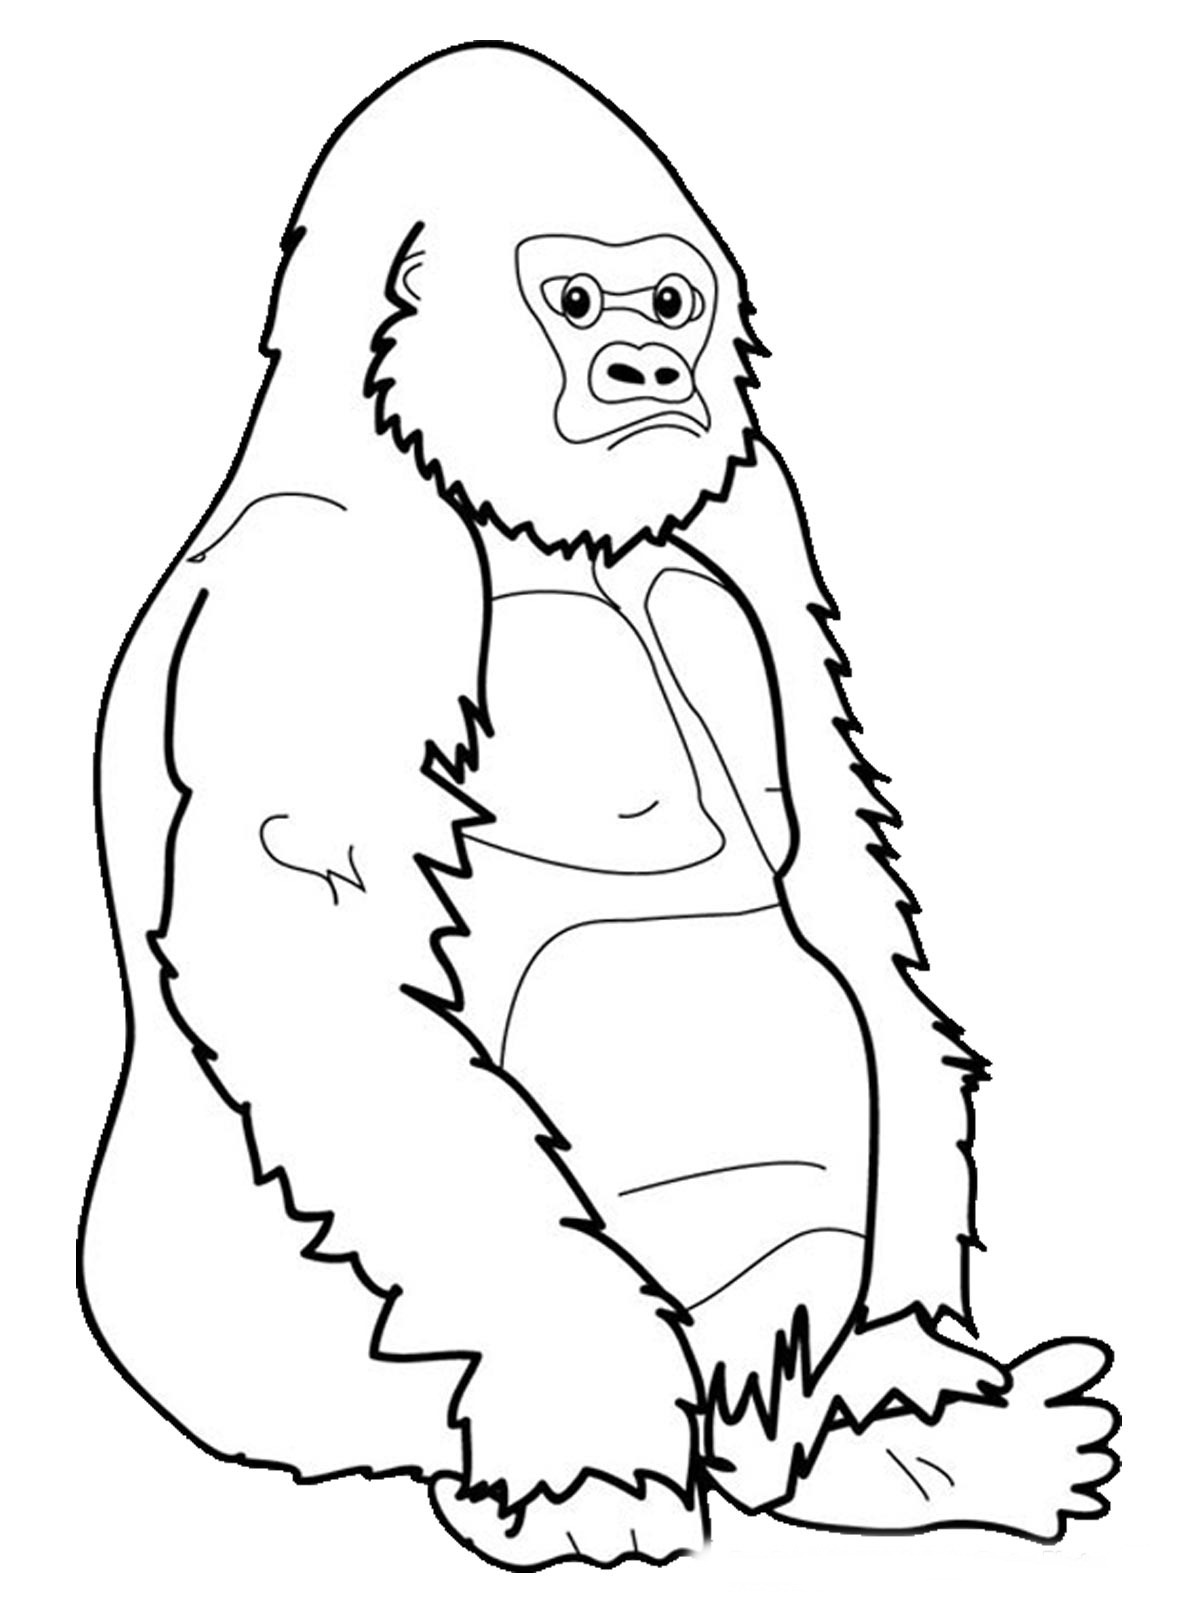 Easy Ape Coloring Pages